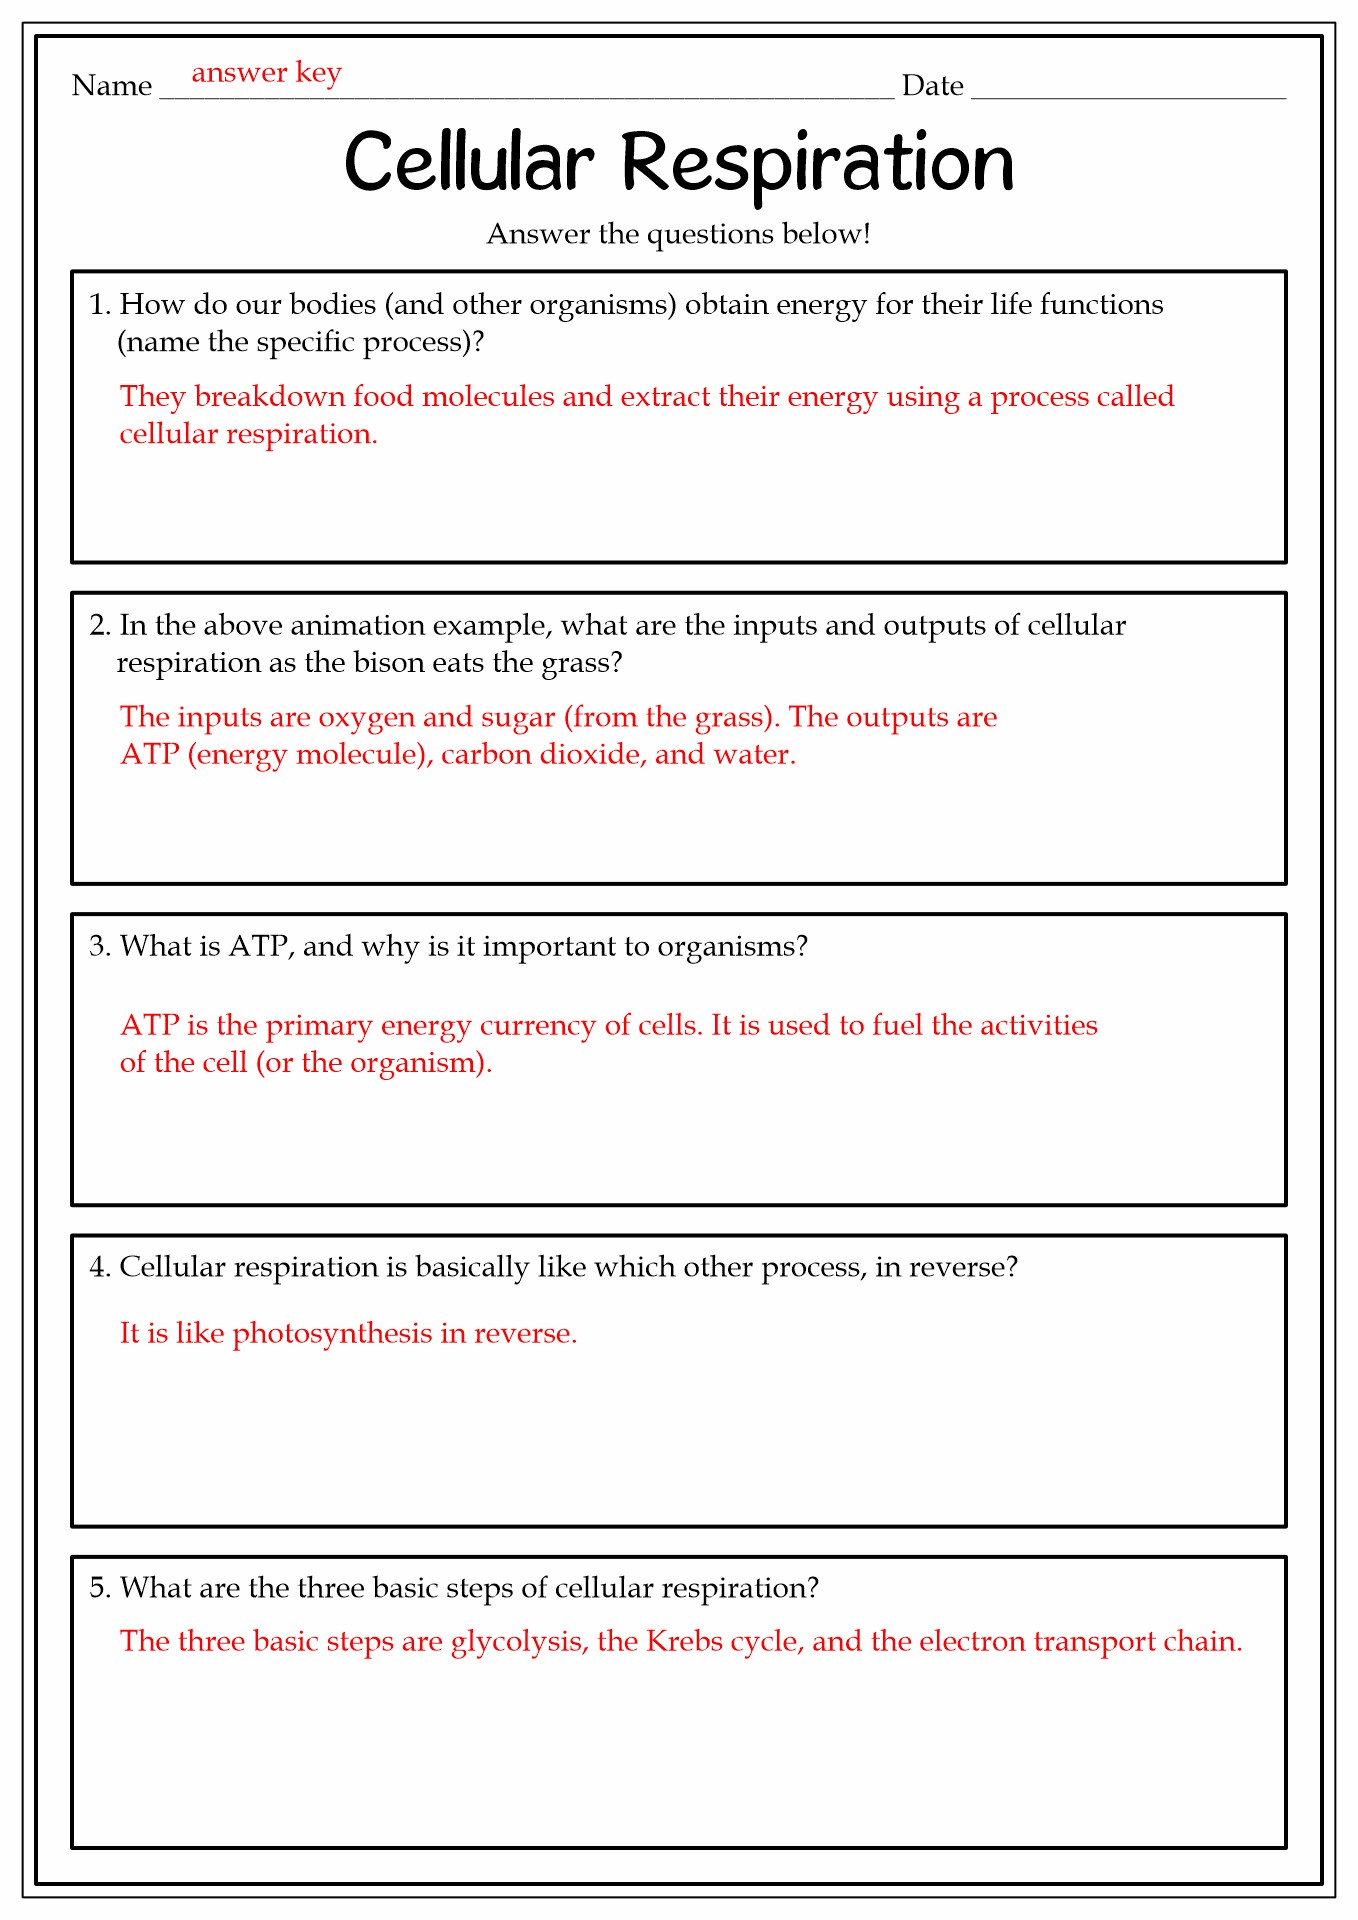 AP Biology Cell Respiration Worksheet Answers Image